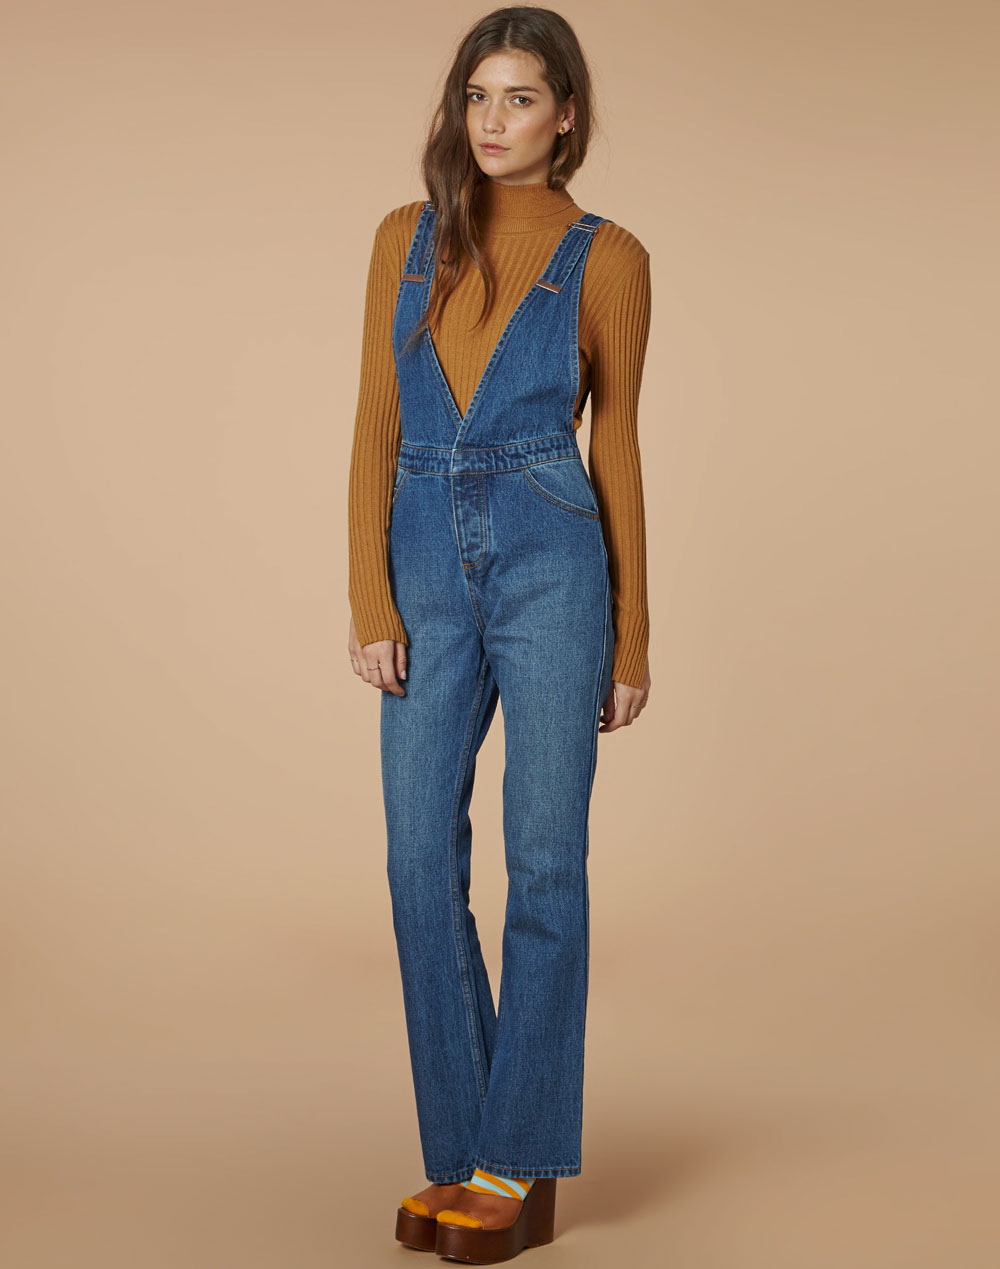 First look: 70s flavour for Glassons’ edt. #5 collection - Fashion ...